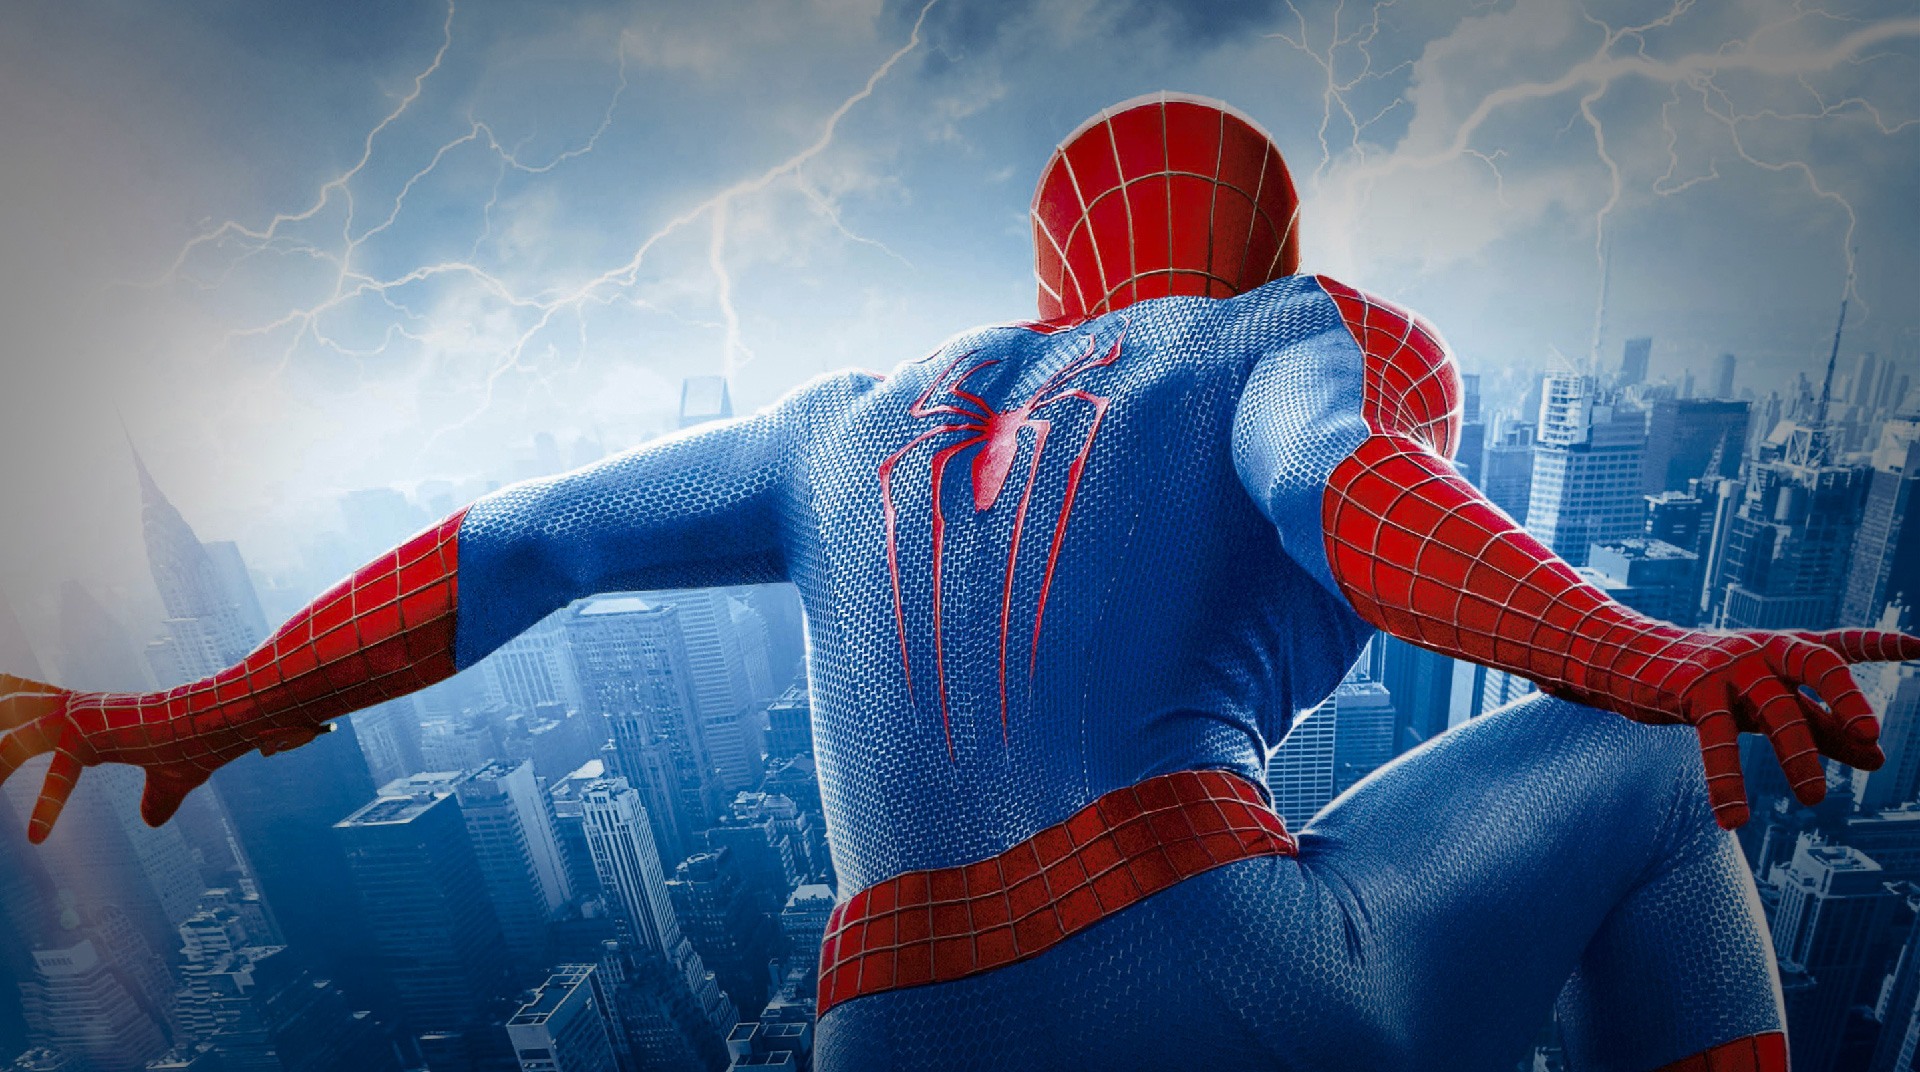 spider man 3 apk android